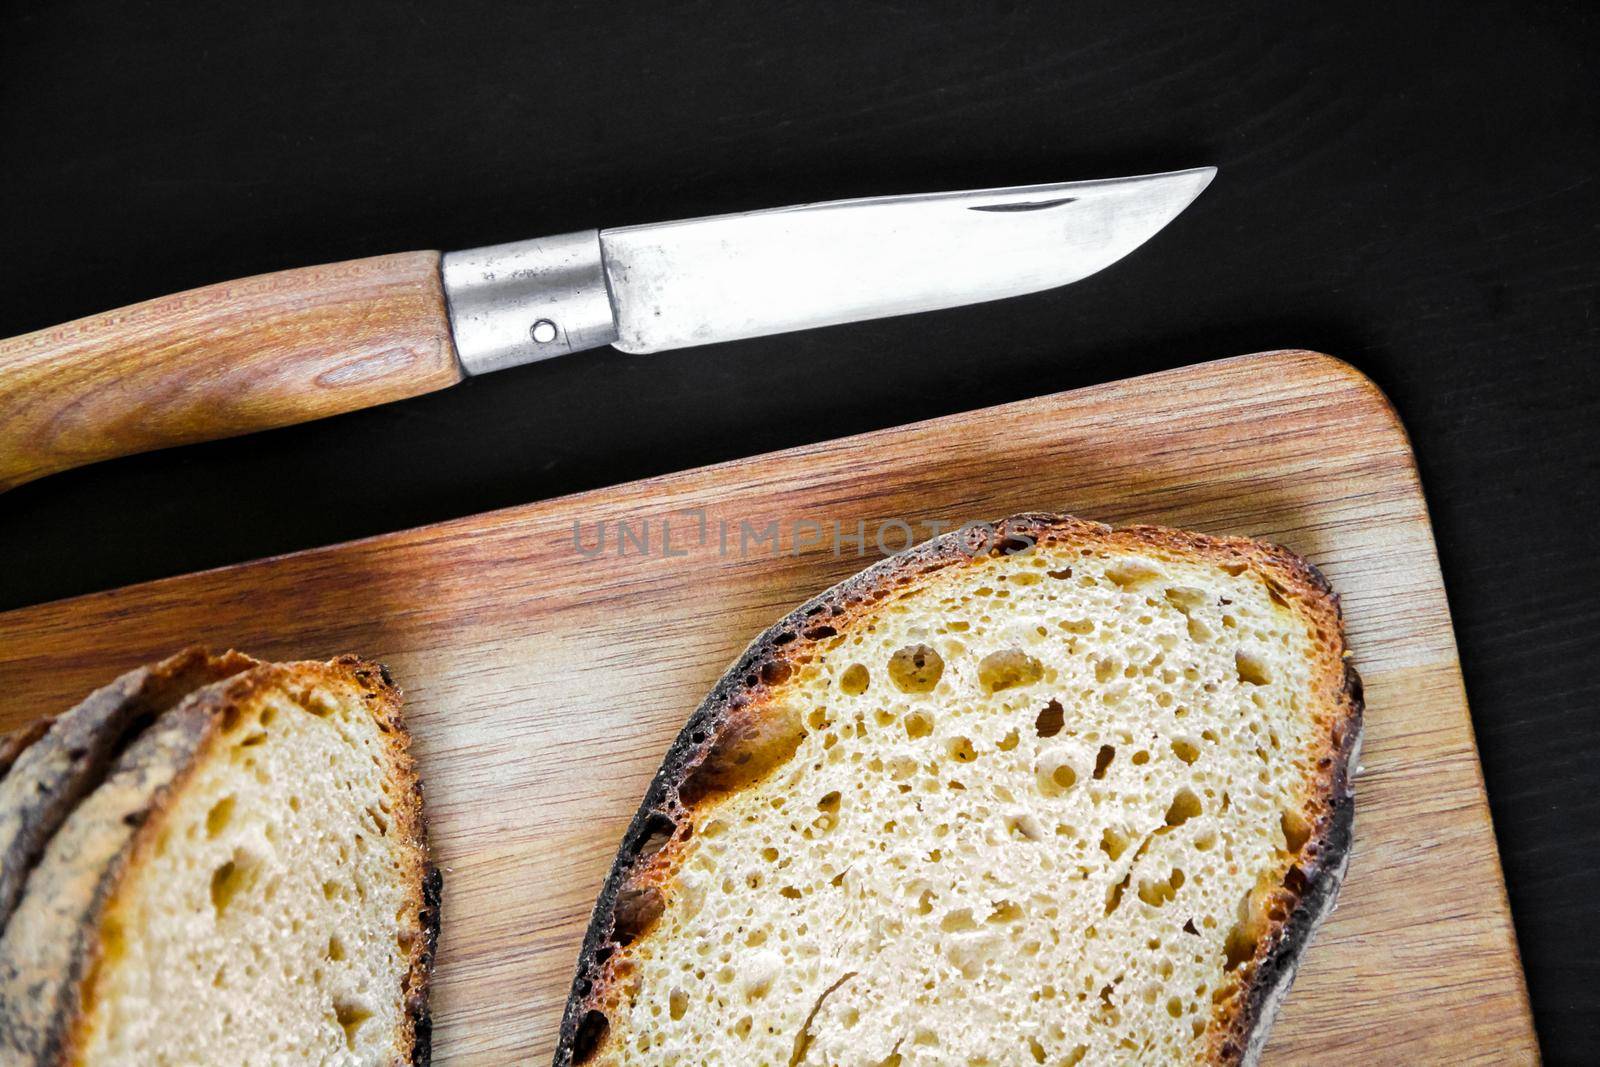 Traditional French country bread slices and pocket knife on a wooden cutting board. Top view